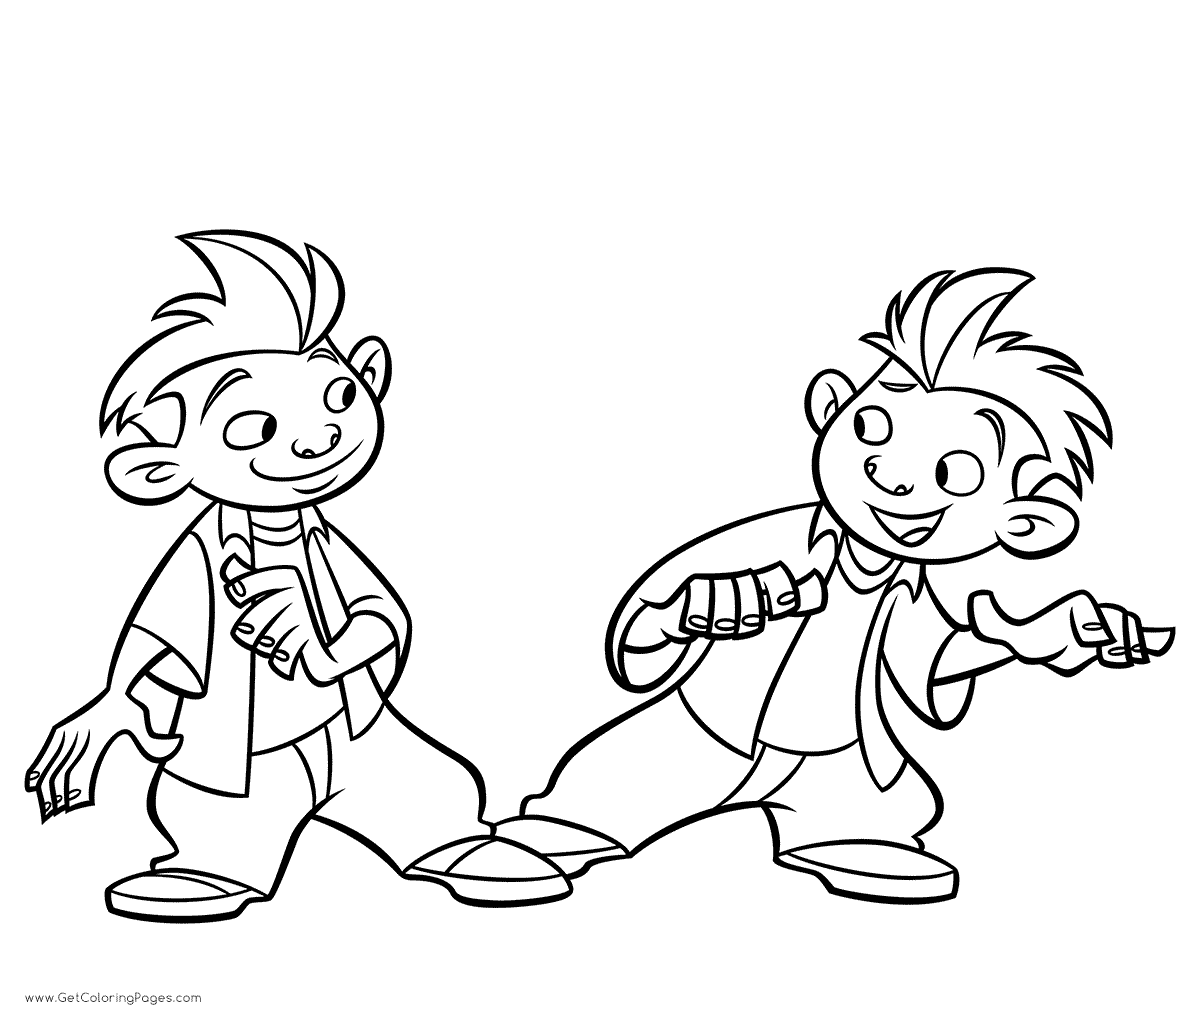 Jim and Tim Coloring Page